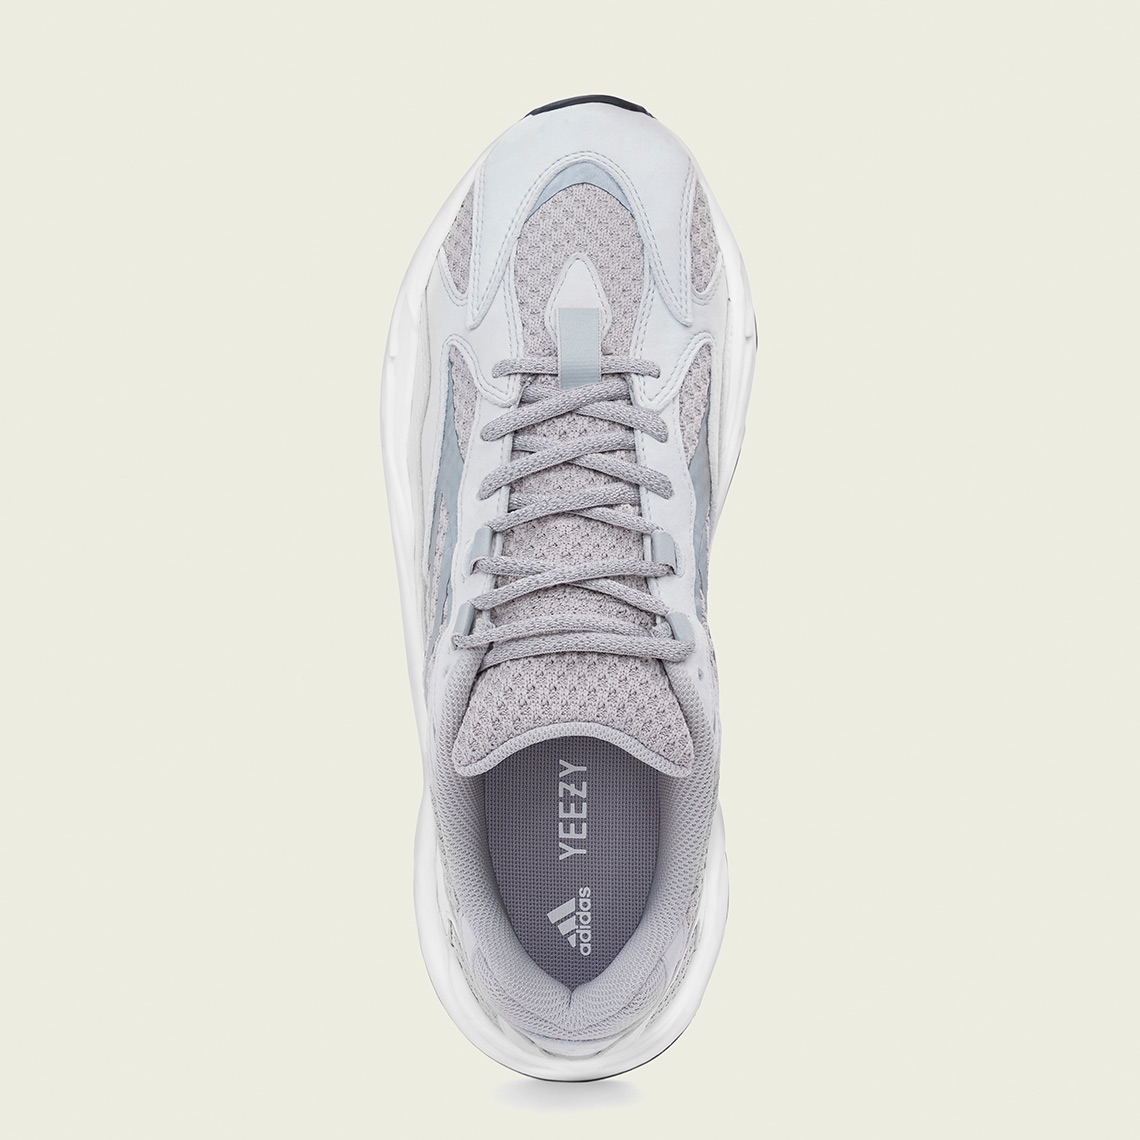 adidas Yeezy Boost 700 v2 Static Store 